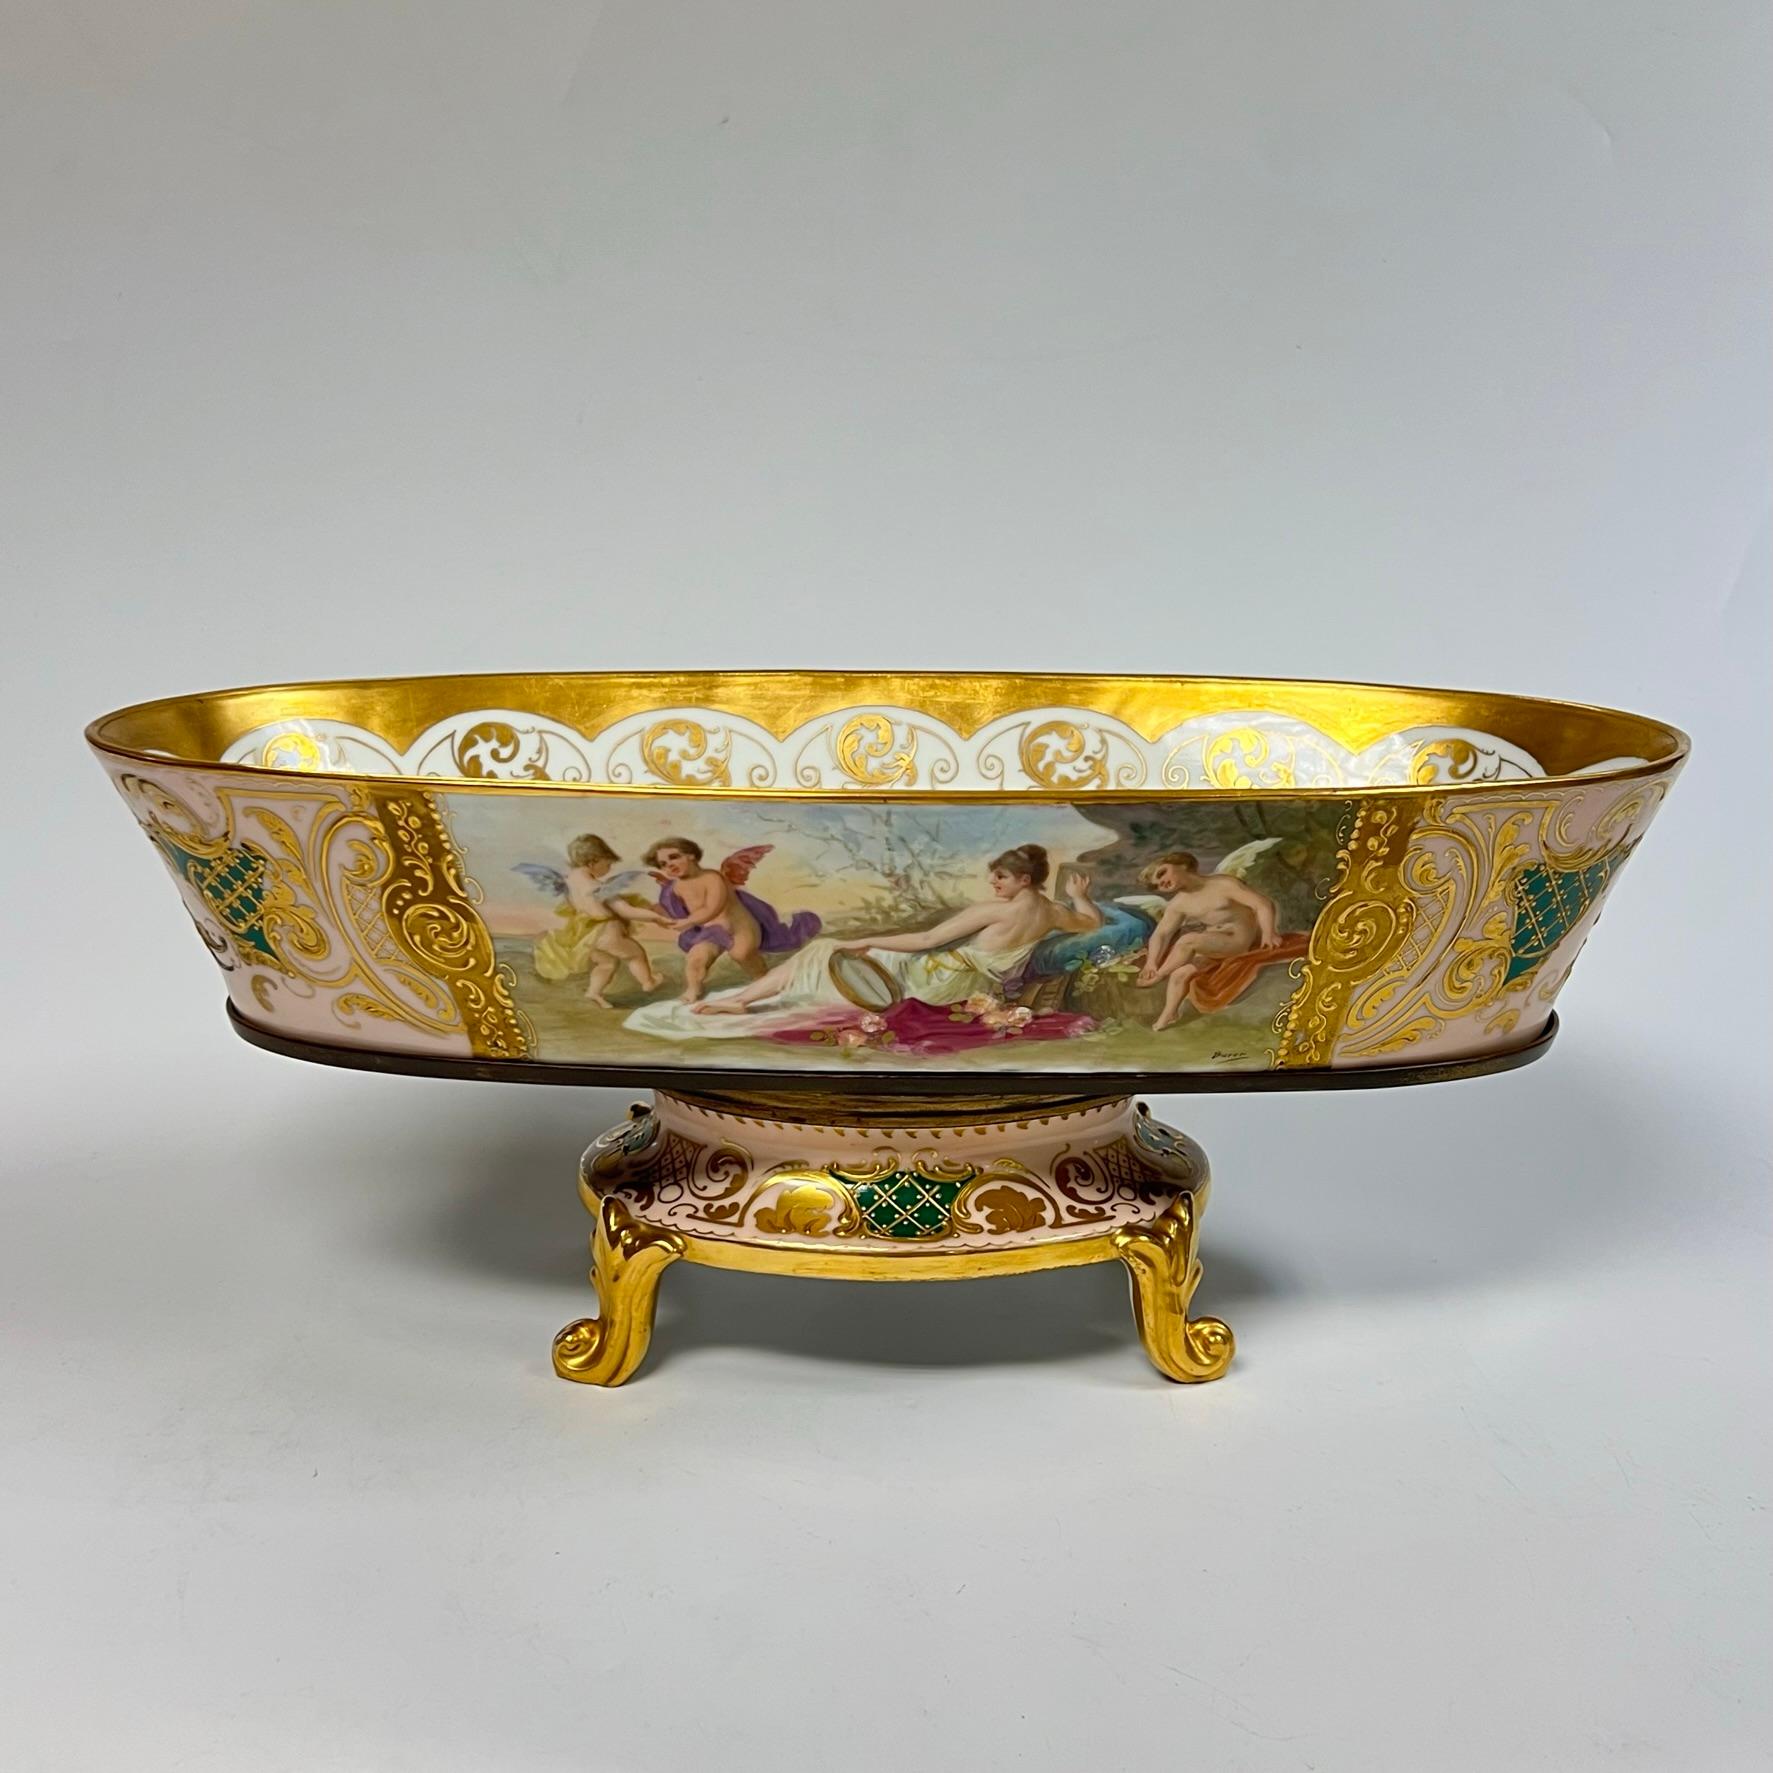 Neoclassical Revival 19th Century Porcelain Centerpiece Bowl / Jardiniere on Stand from Royal Vienna For Sale